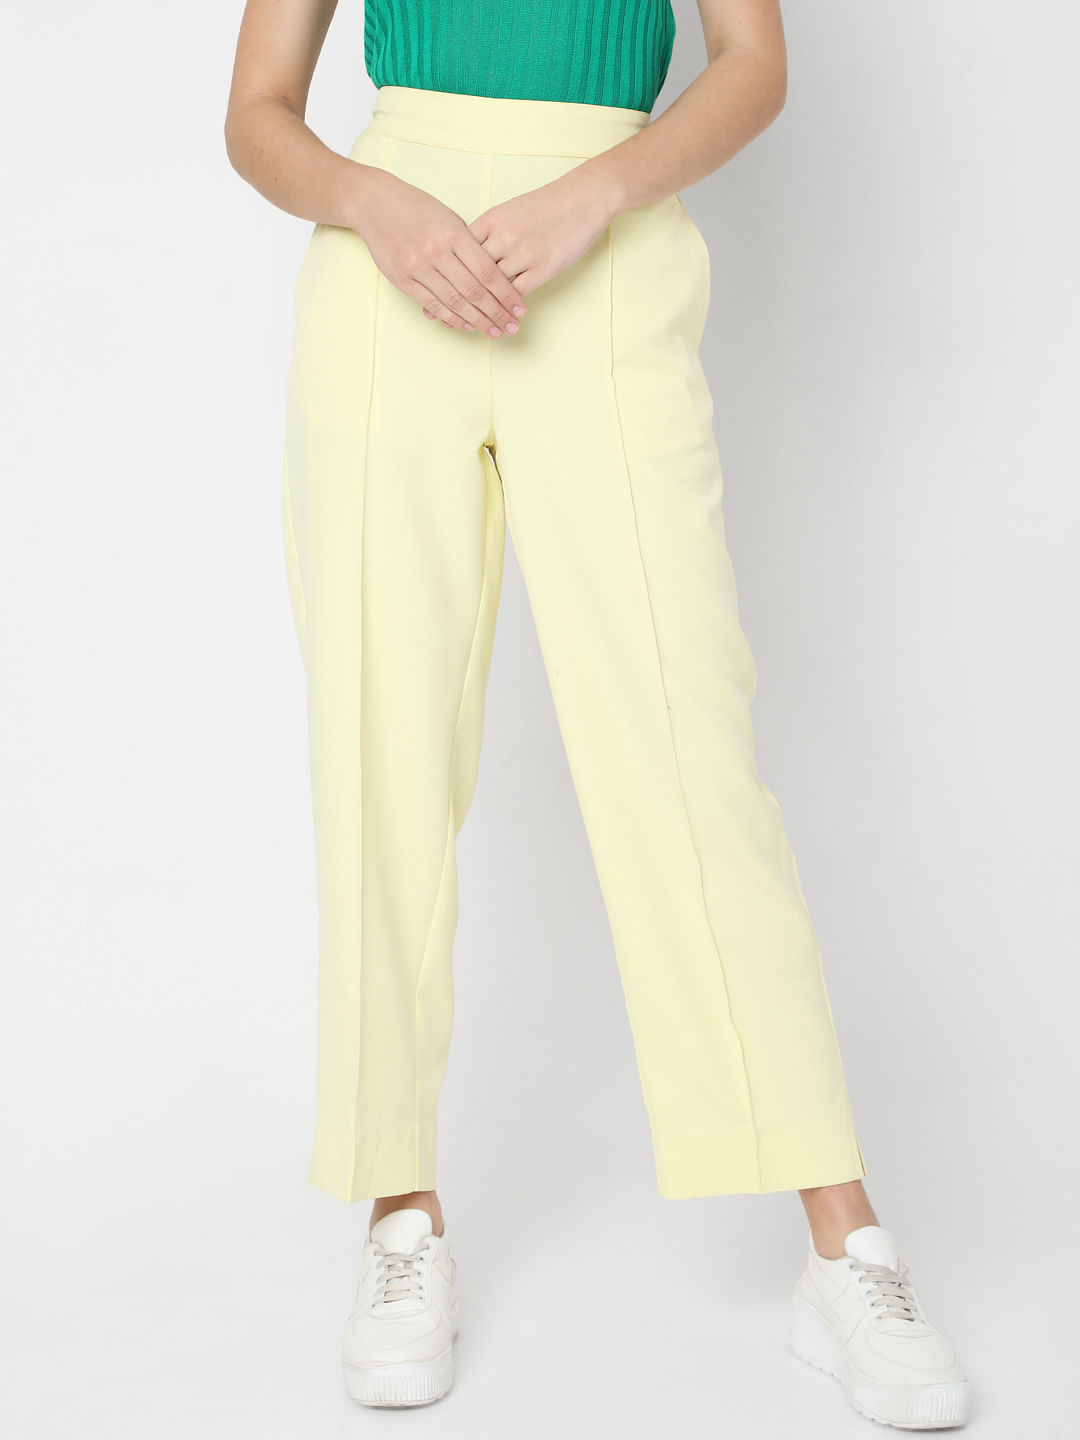 Where can I buy the best work trousers for women? - Quora